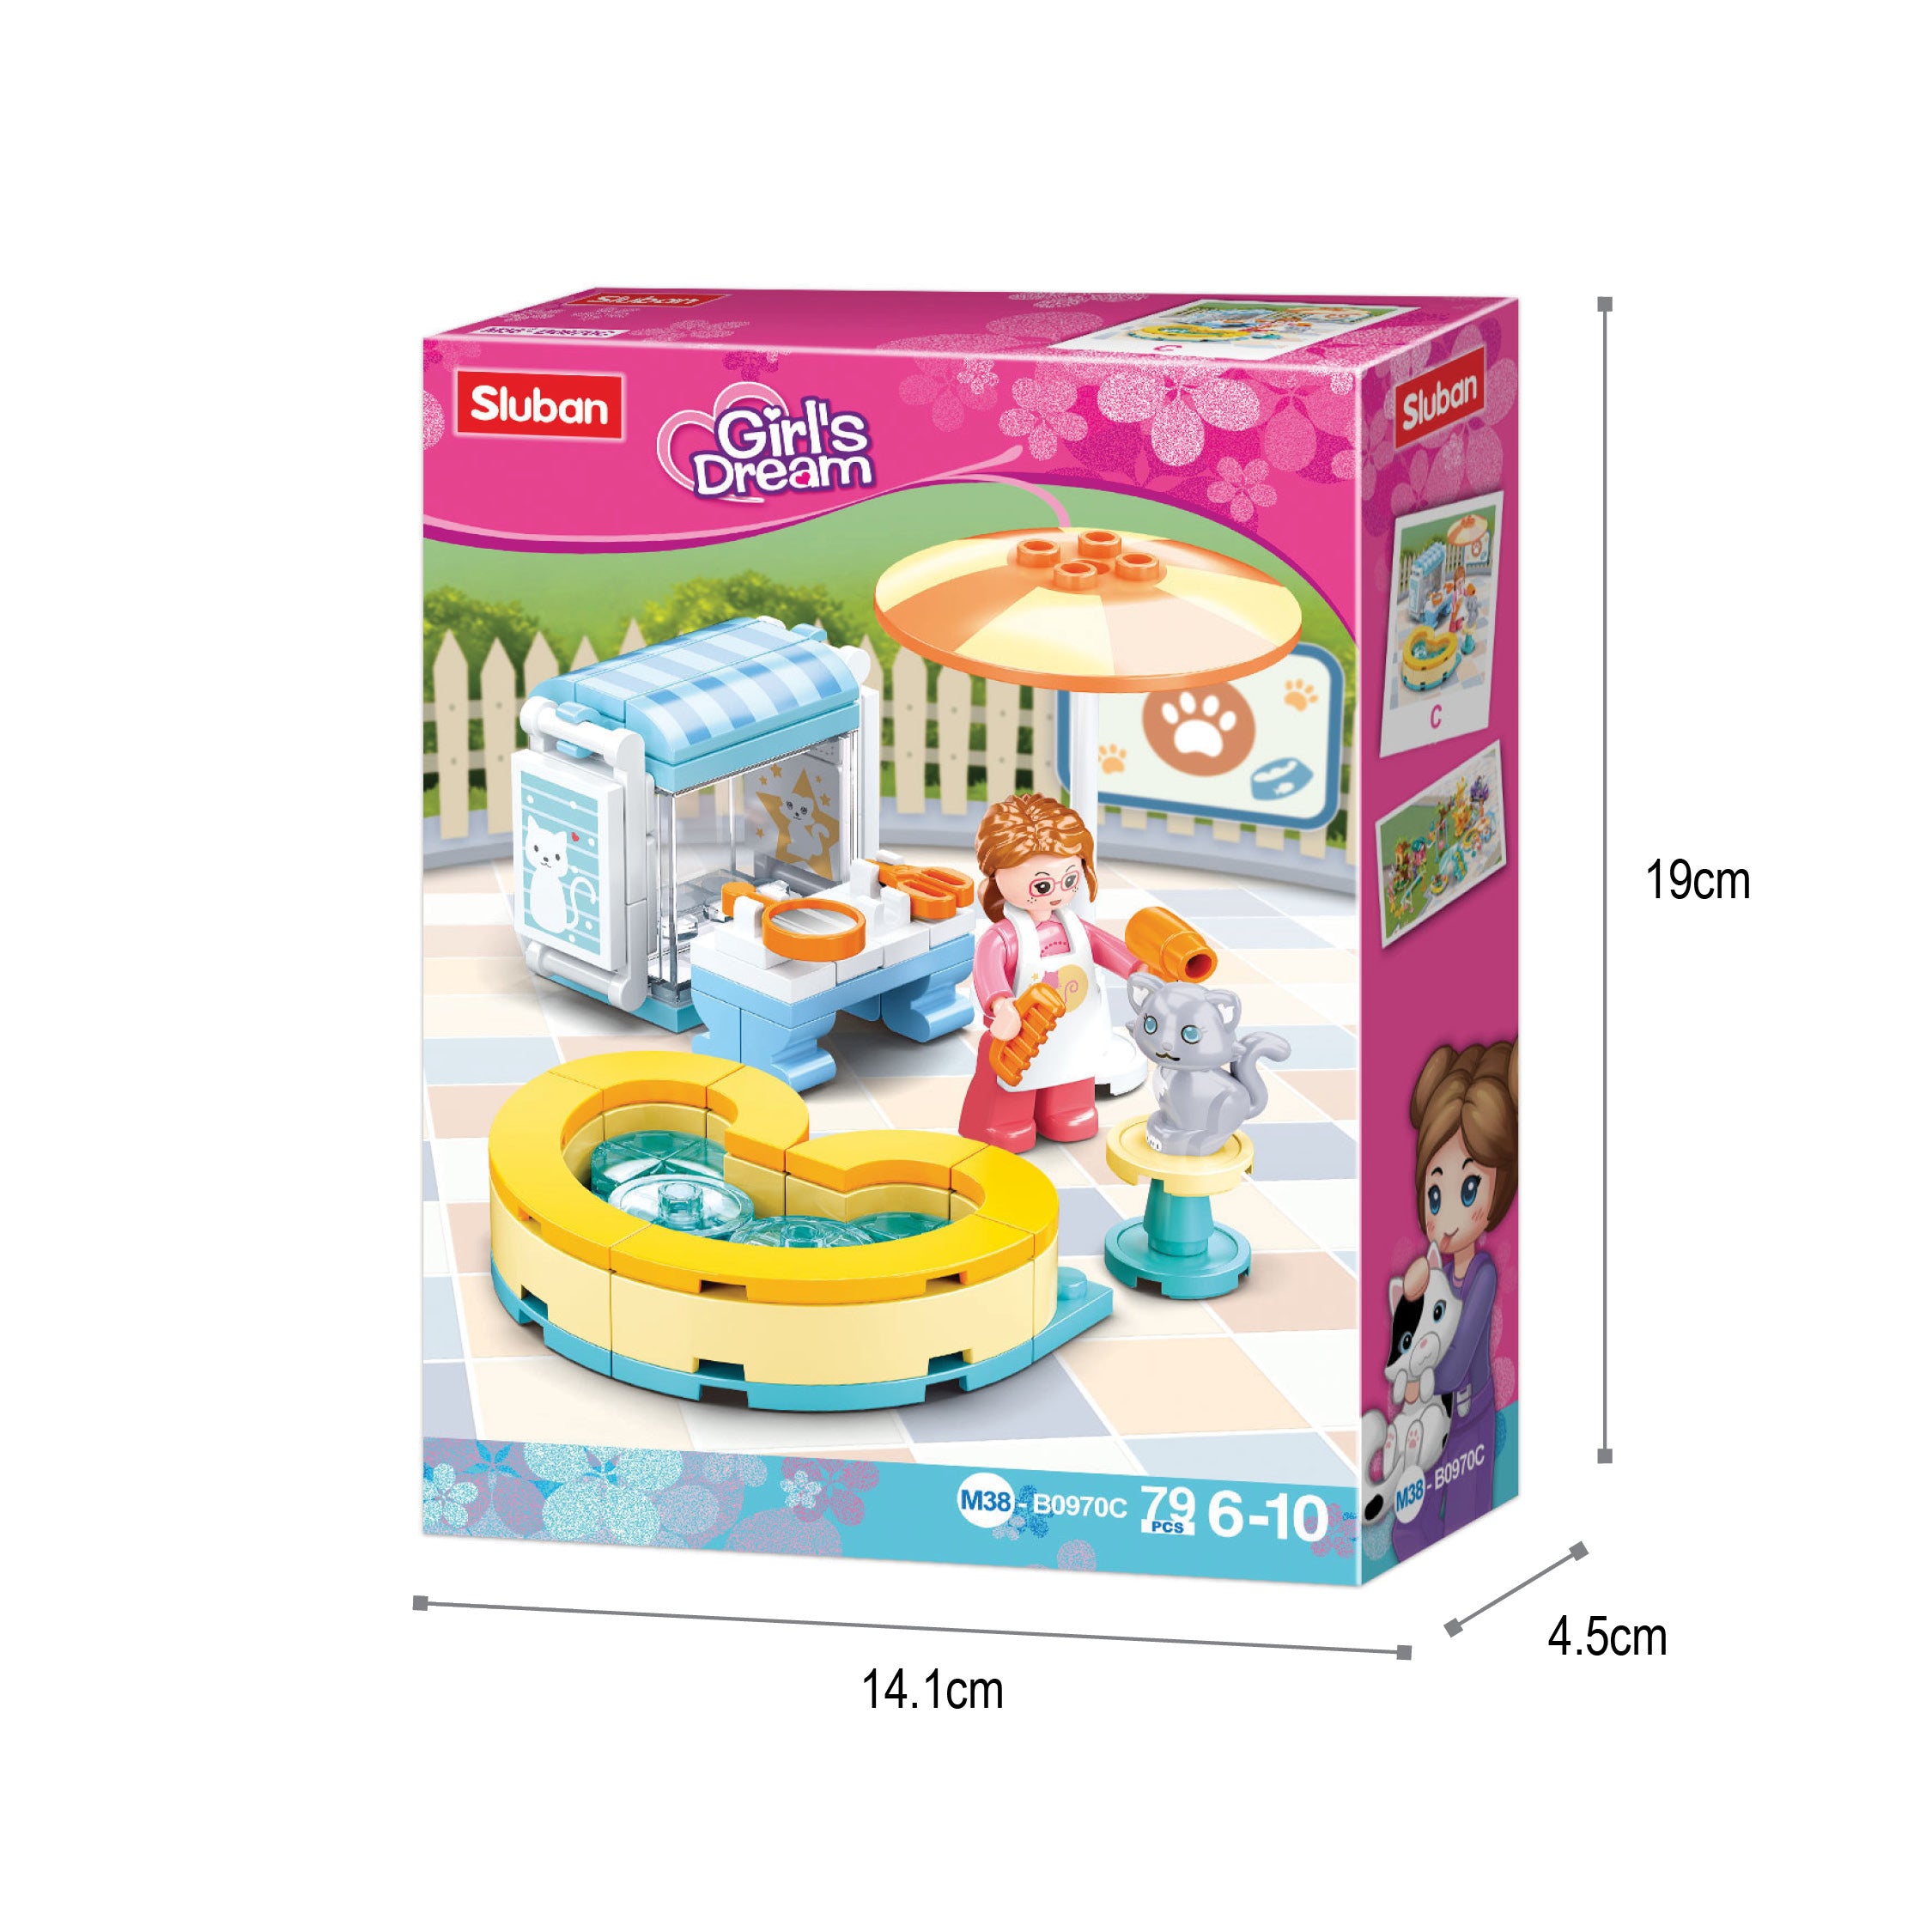 SLUBAN® Cat Spa (M38-B970C) (79 Pieces) Building Blocks Kit For Girls Aged 6 Years And Above Creative  Construction Set Educational STEM Toy, Ideal For Gifting Birthday Gift Return Gift, Blocks Compatible With Other Leading Brands, BIS Certified.